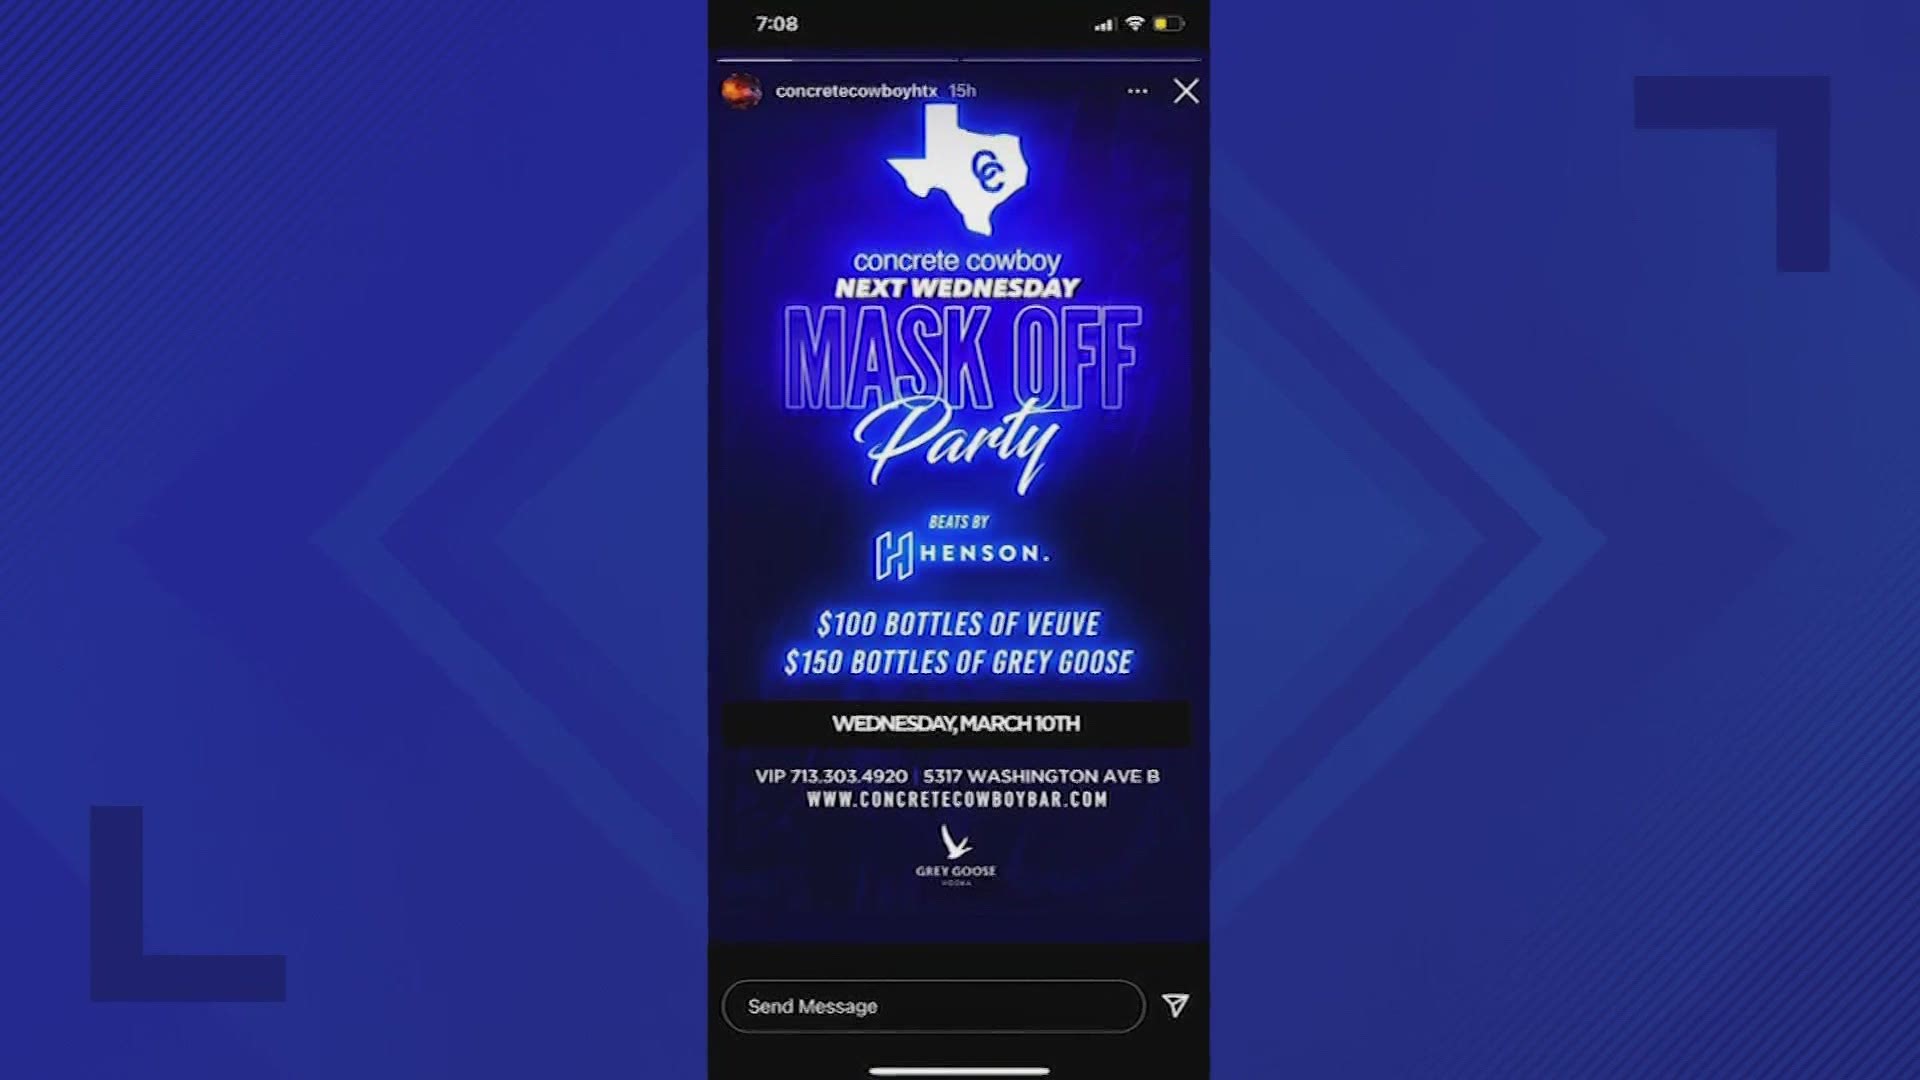 A Houston bar is reportedly planning a "mask off" party to celebrate the end of the statewide mask mandate. Local elected officials are demanding organizers cancel.